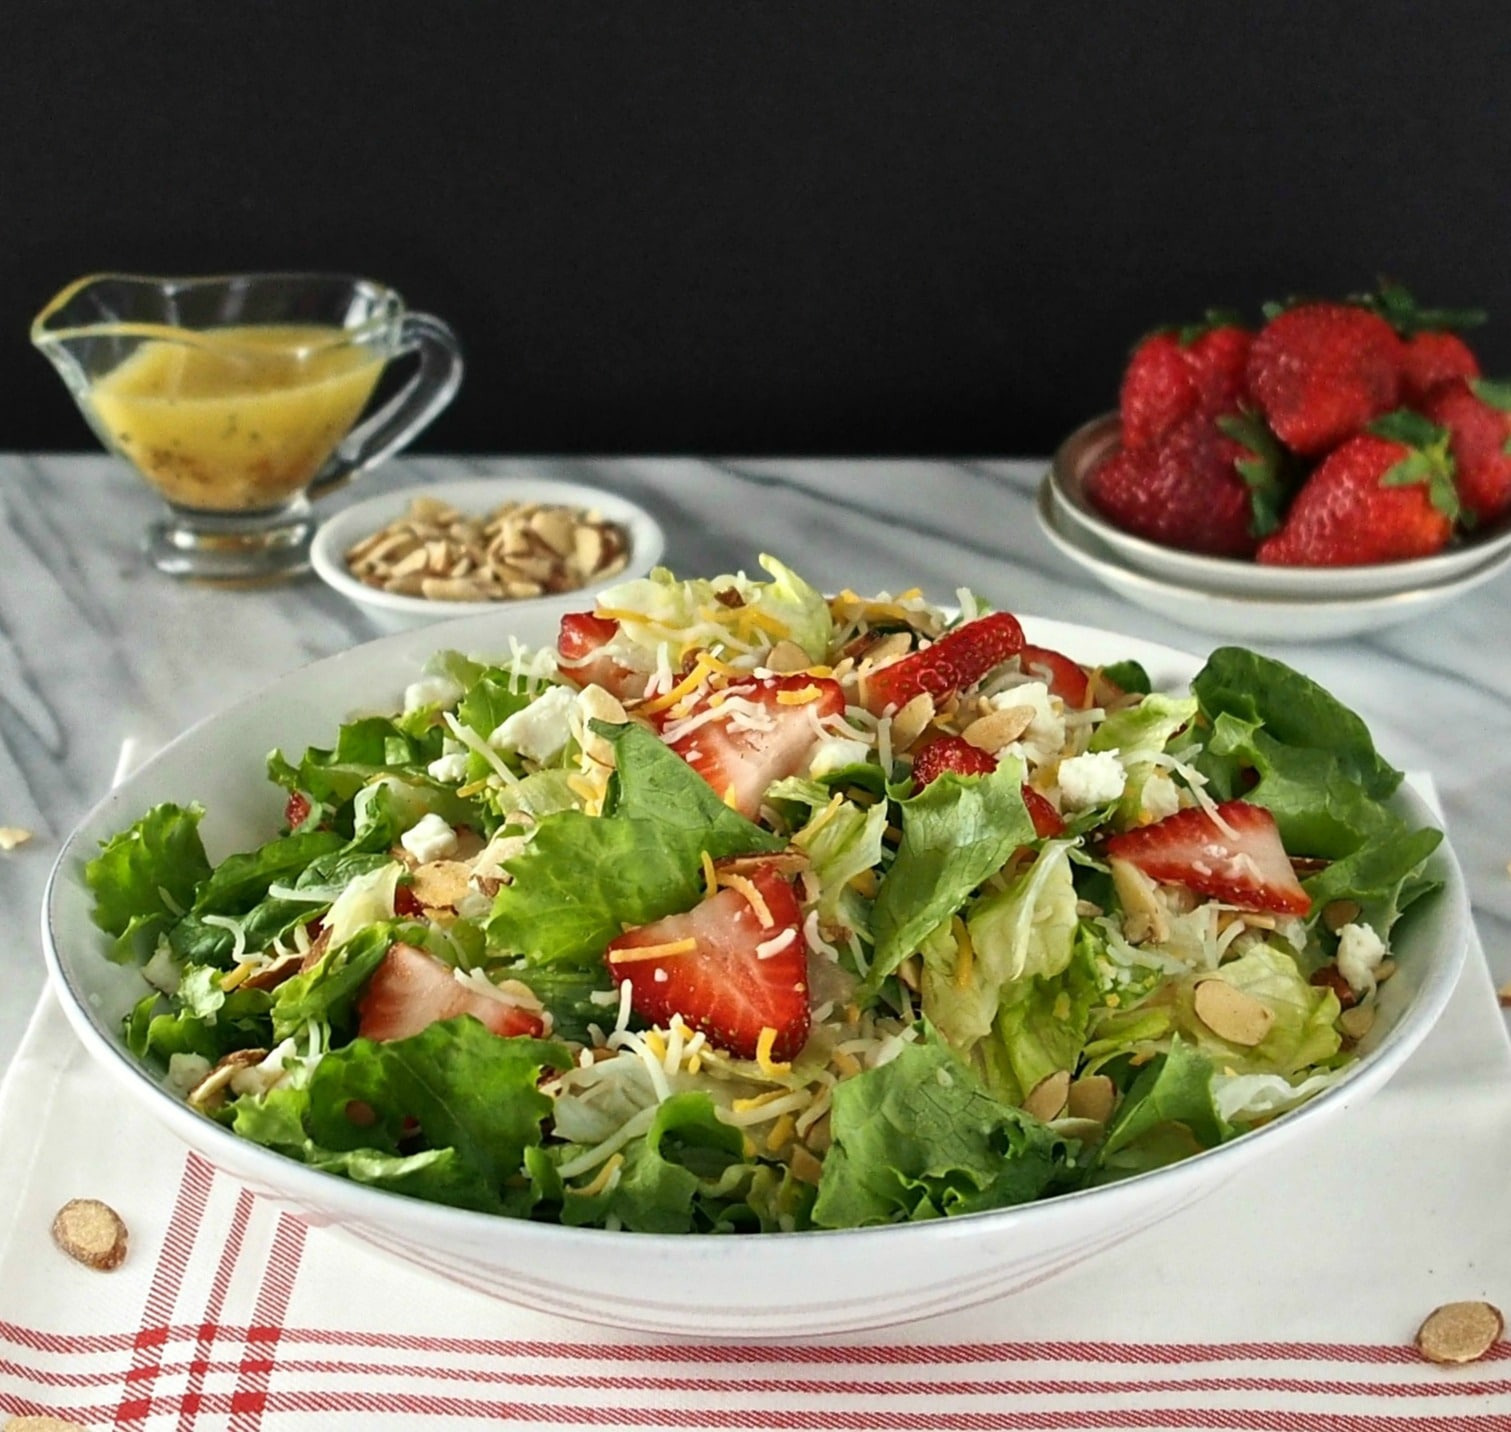 Strawberries & Greens Salad has stood the test of time. Strawberries, greens, sugared almonds, cheese with poppy seed sweet & sour dressing & croutons. Simply Sated